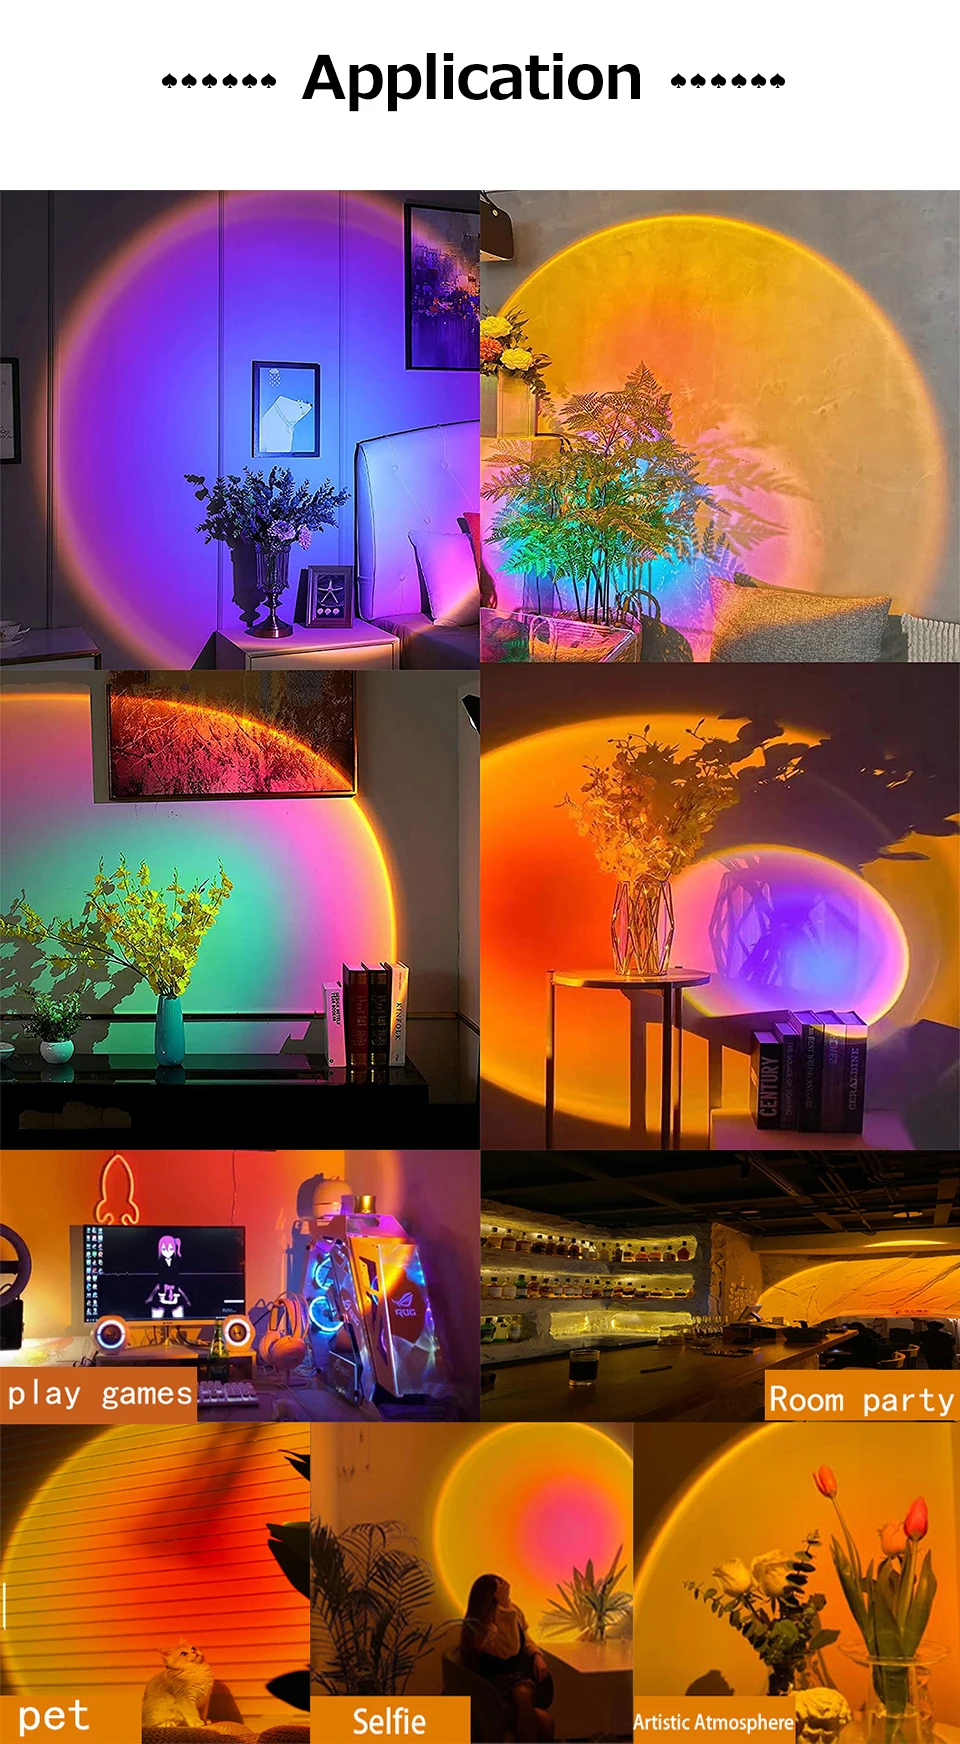 Sunset Lamp RGB 16 Colors APP Remote Control Bluetooth-compatible Projection Night Light for Home Bedroom Background Decoration 3d night light